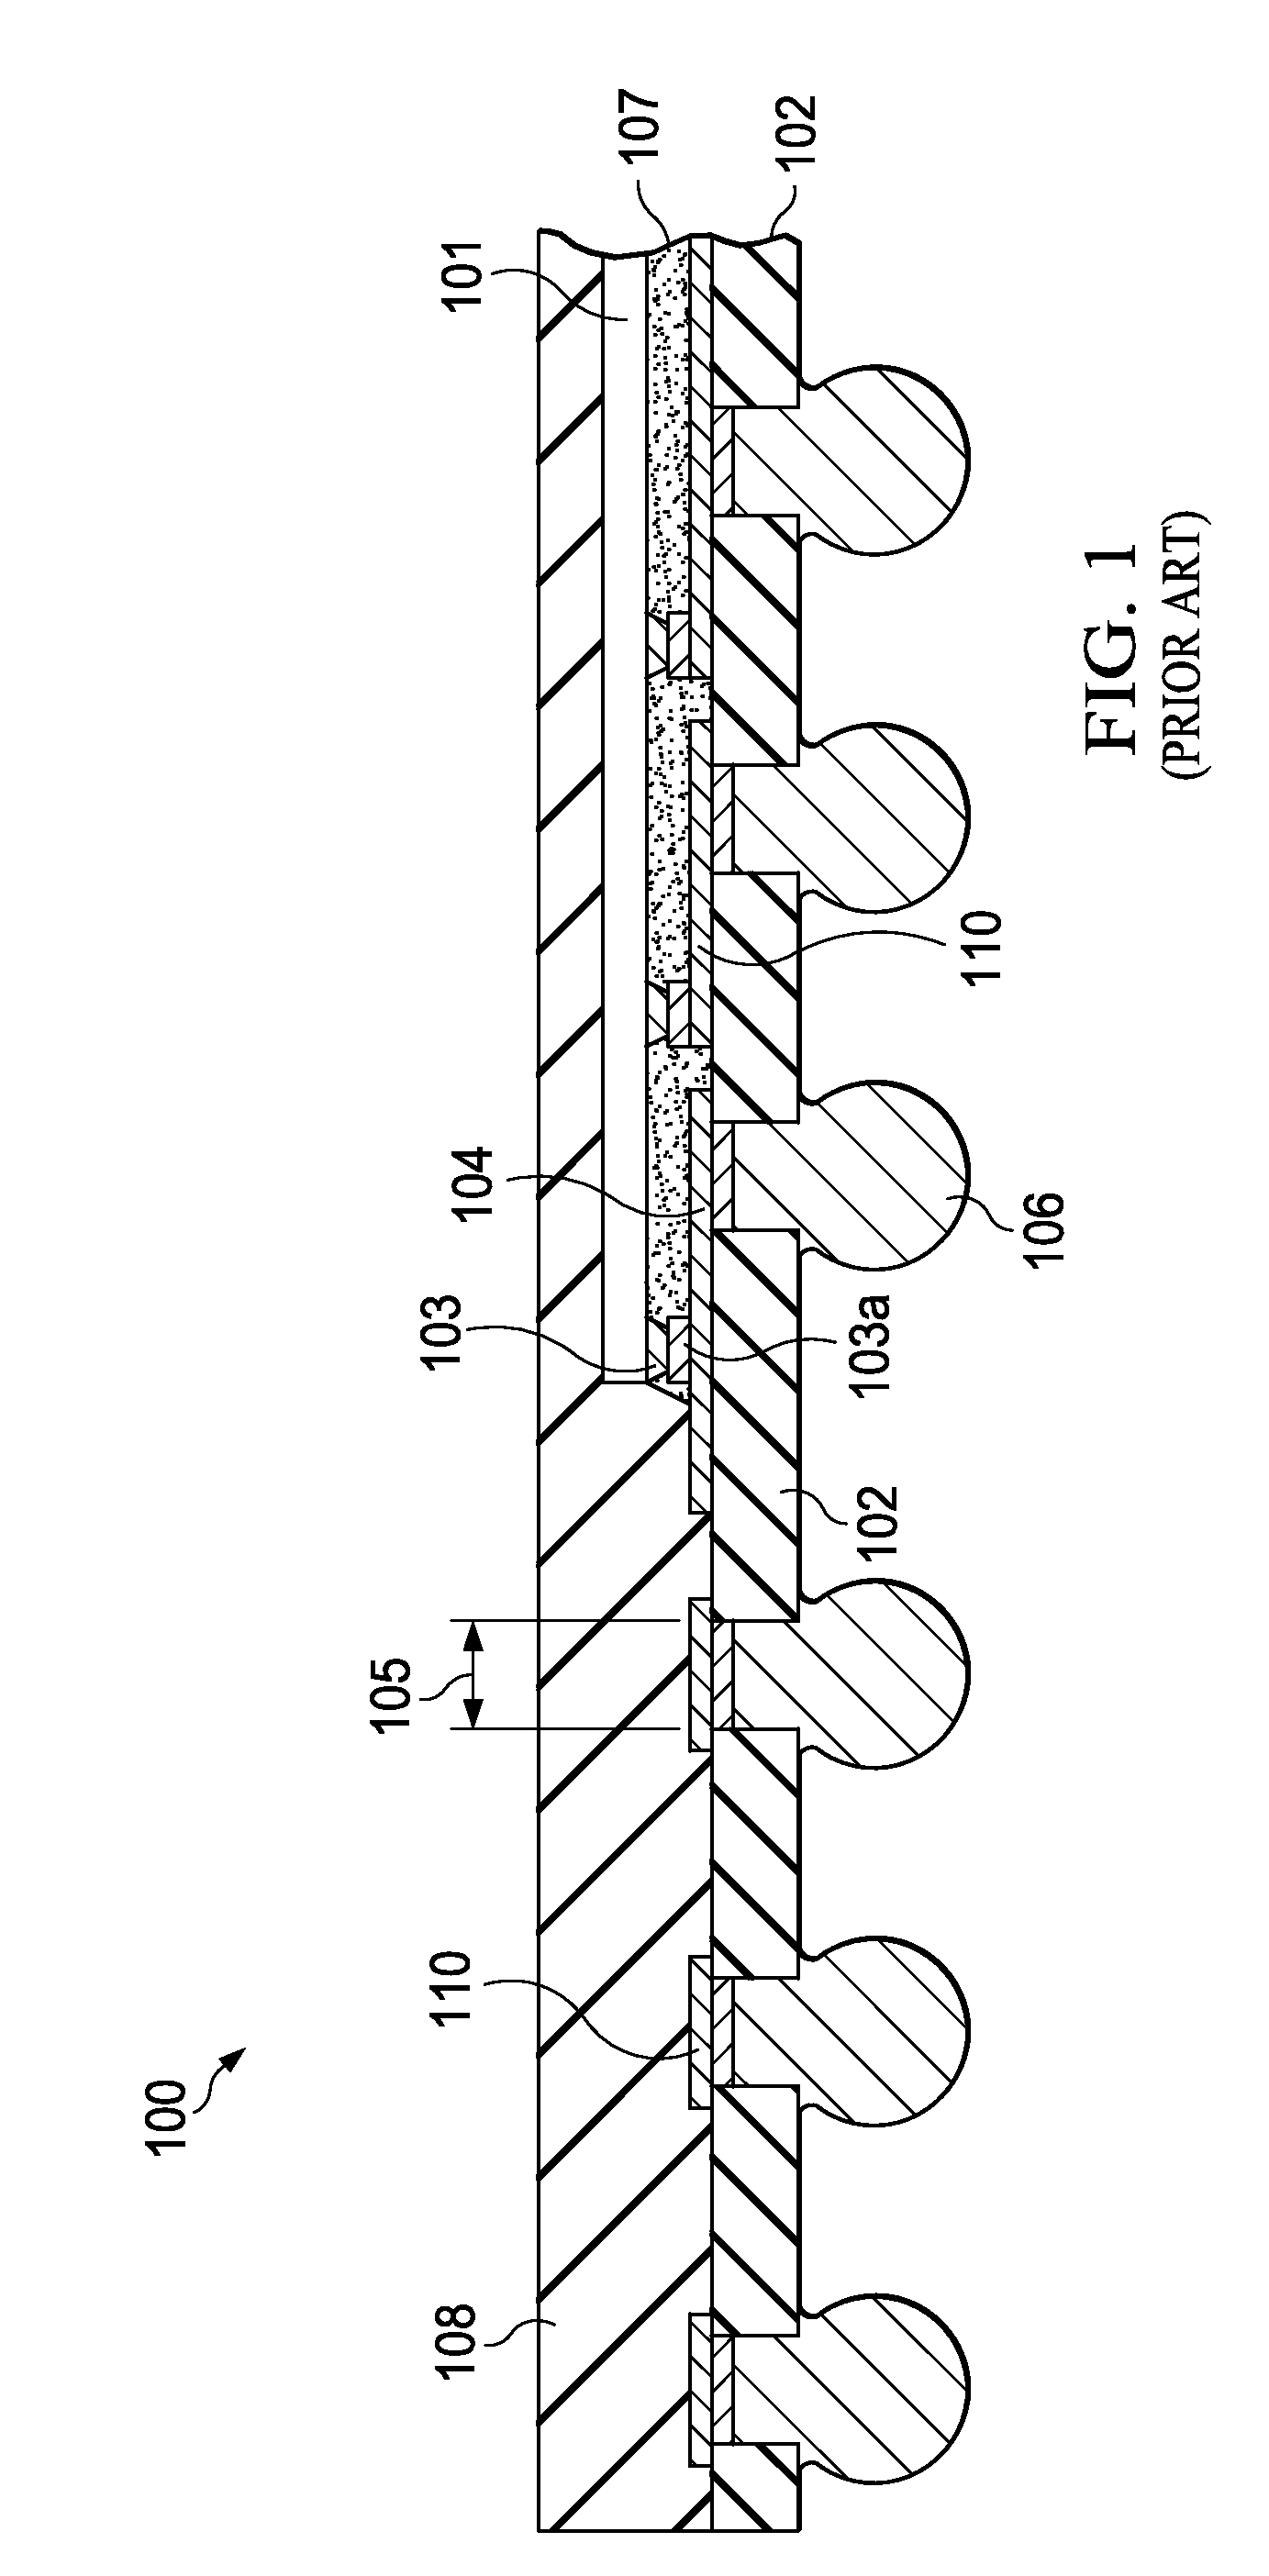 Low Inductance Ball Grid Array Device Having Chip Bumps on Substrate Vias